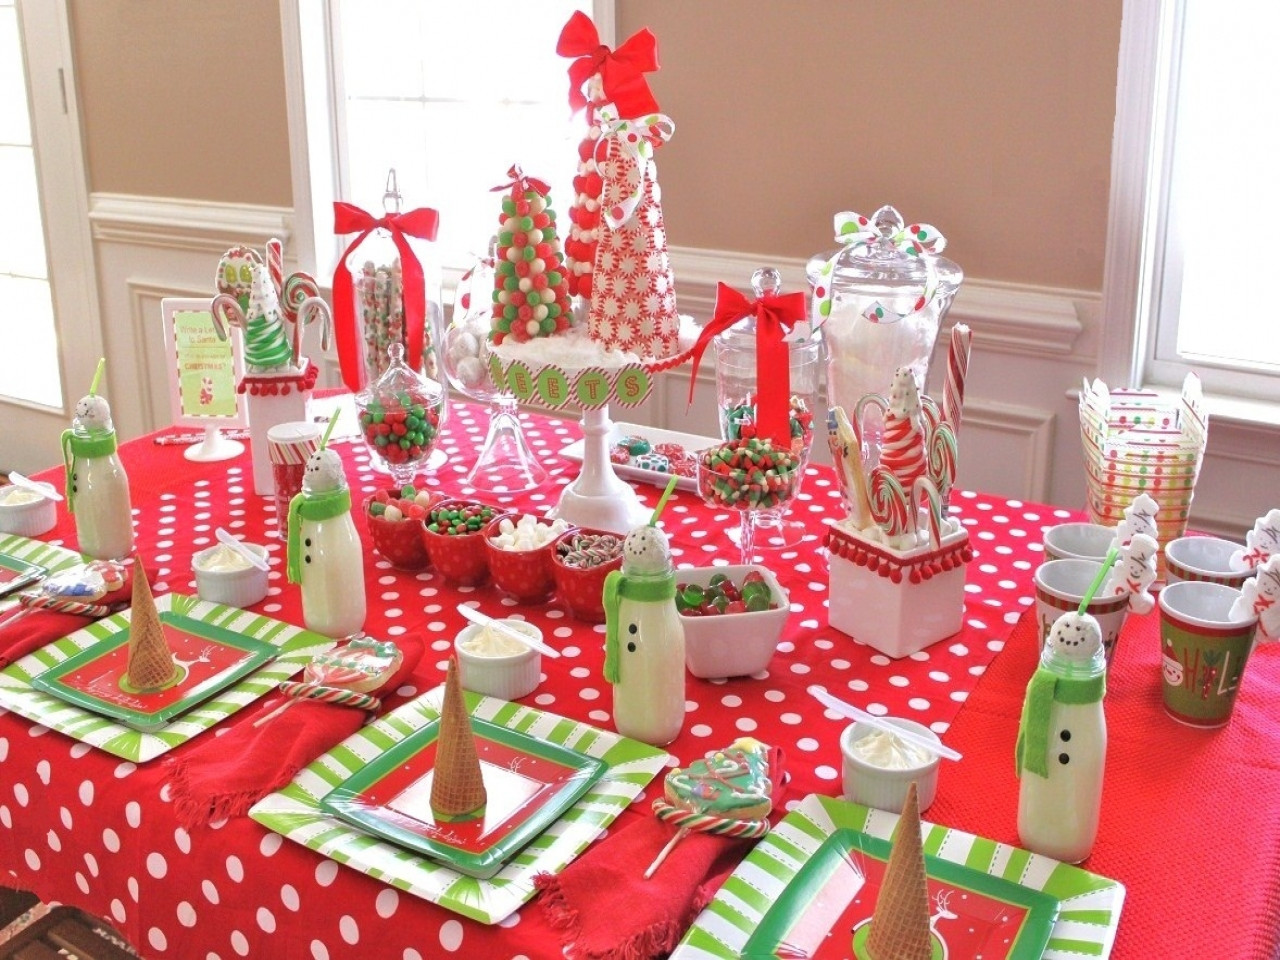 Christmas Party Ideas For Adults
 Bedroom furniture placement ideas kids christmas birthday